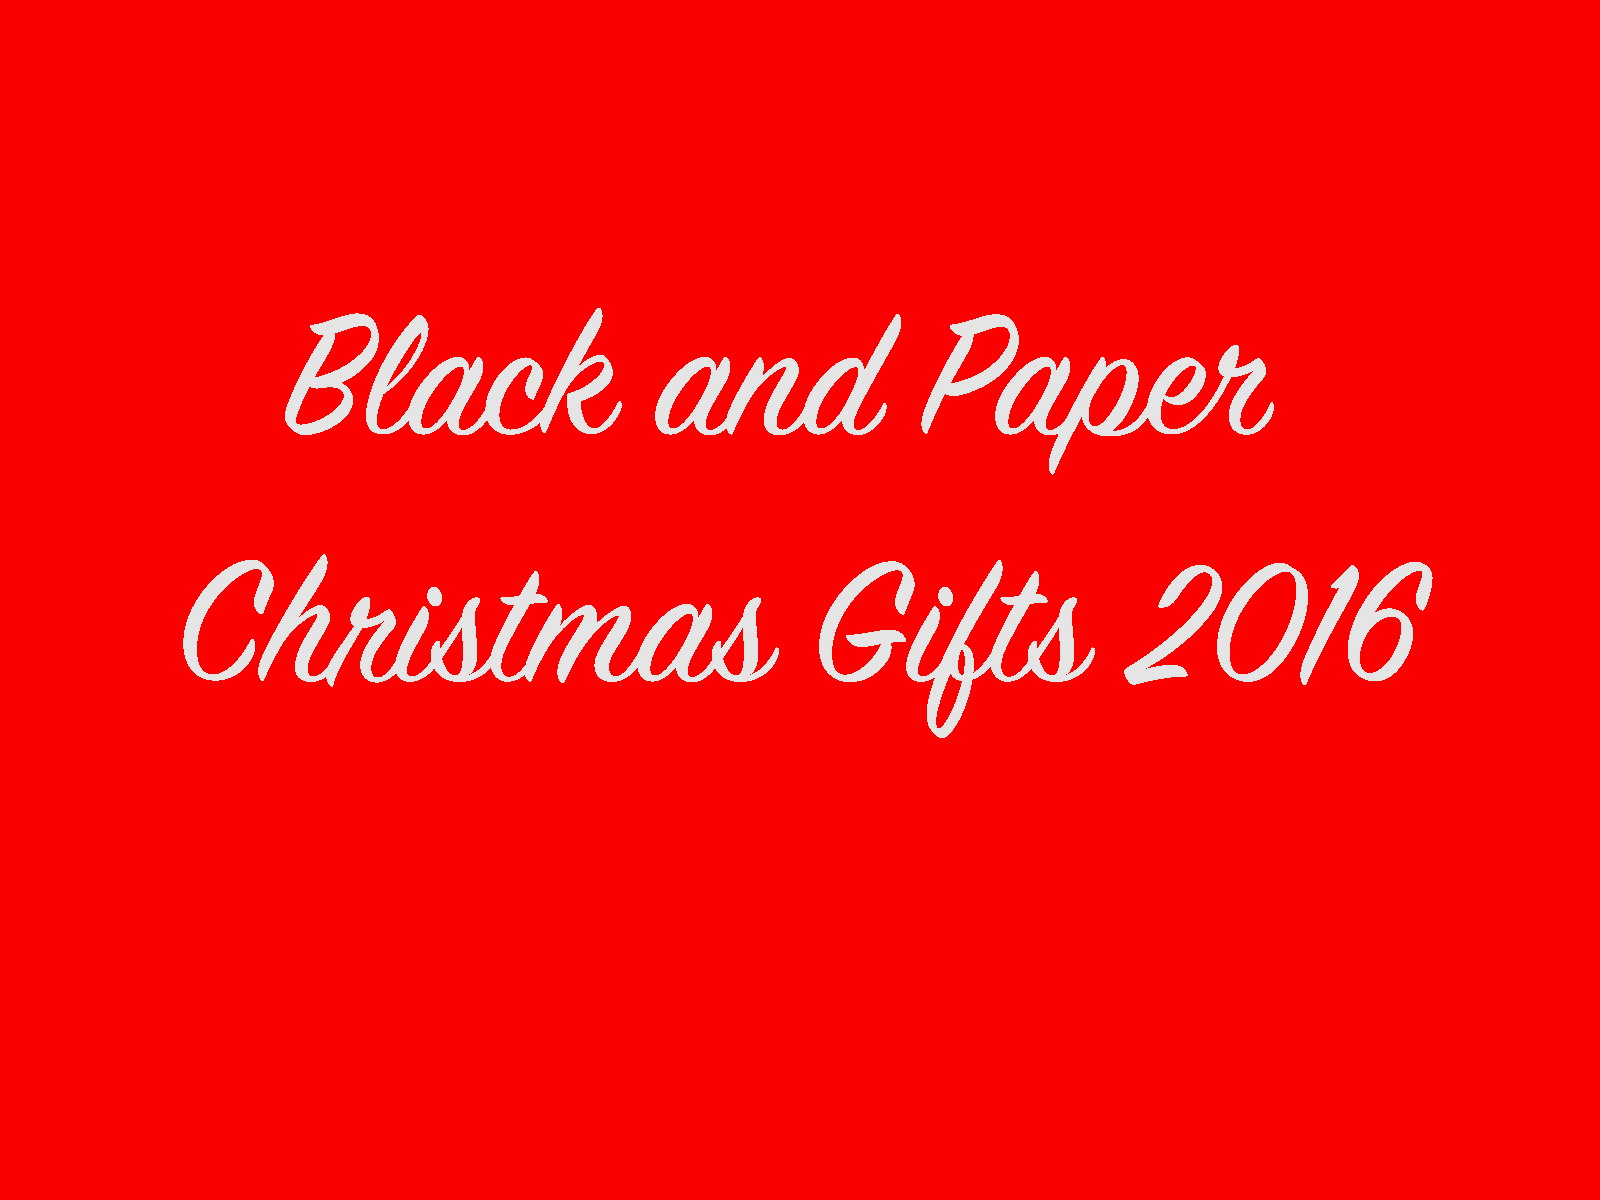 Black and Paper Christmas List 2016